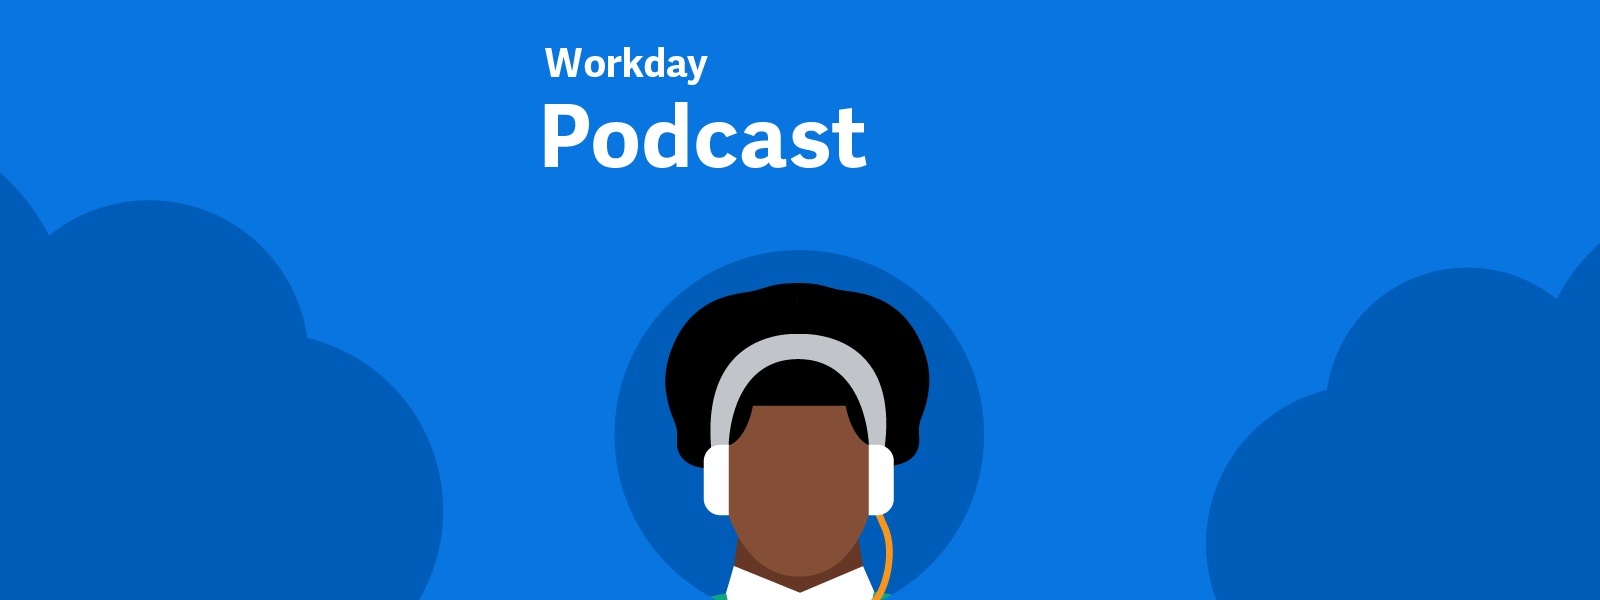 workday-best-content-marketing-podcast (1).jpeg